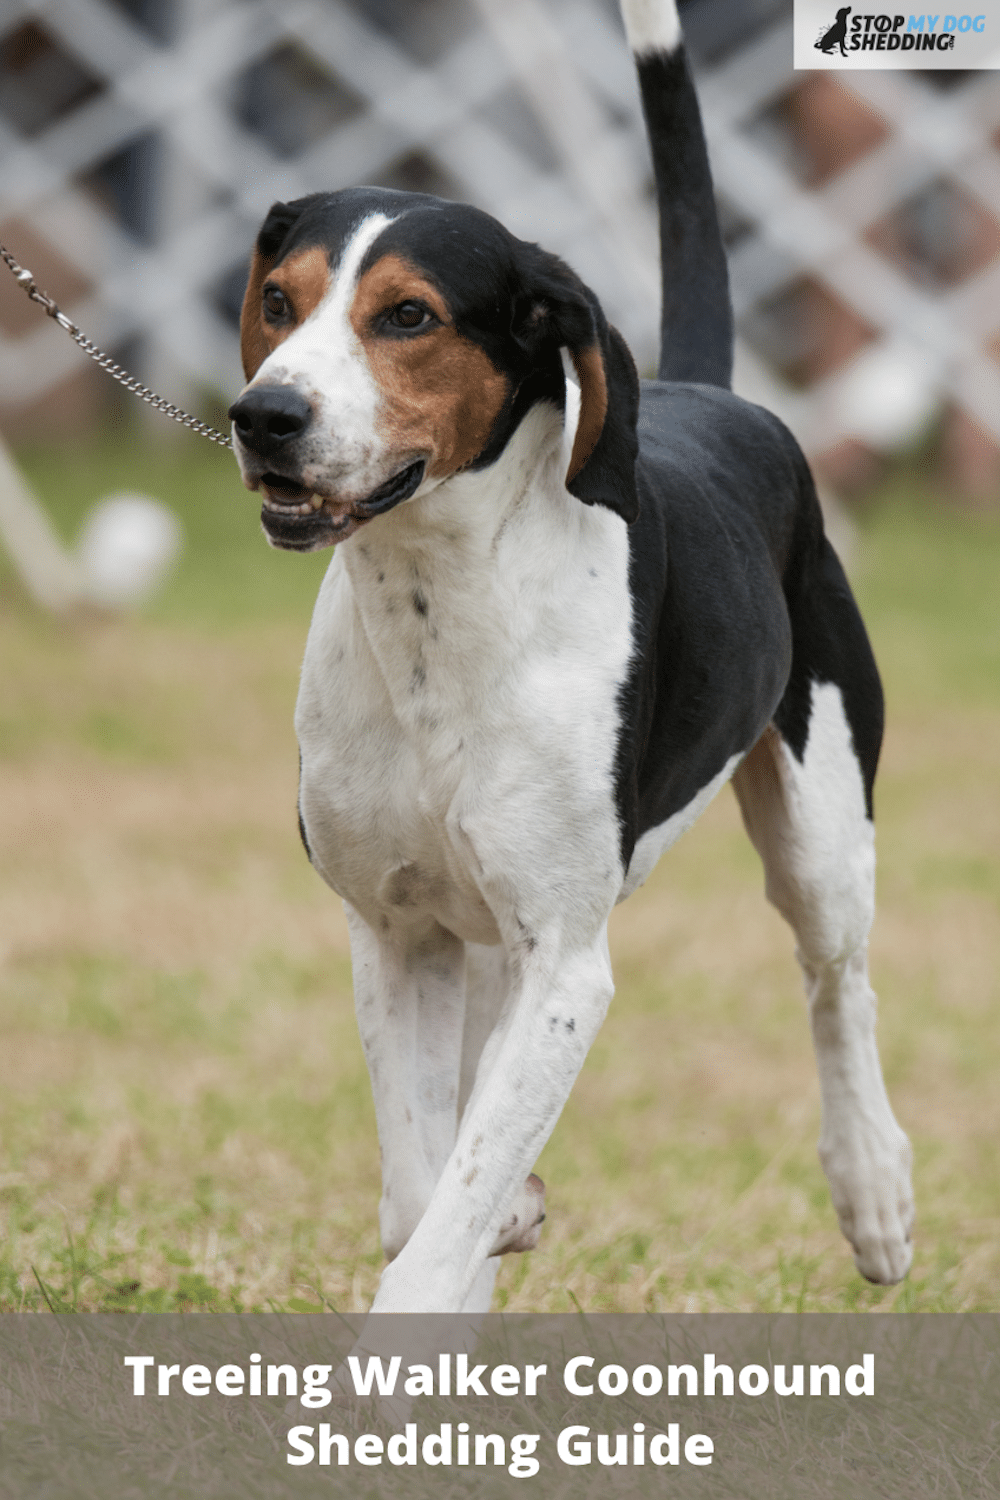 Do Treeing Walker Coonhounds Shed? (Moderately)